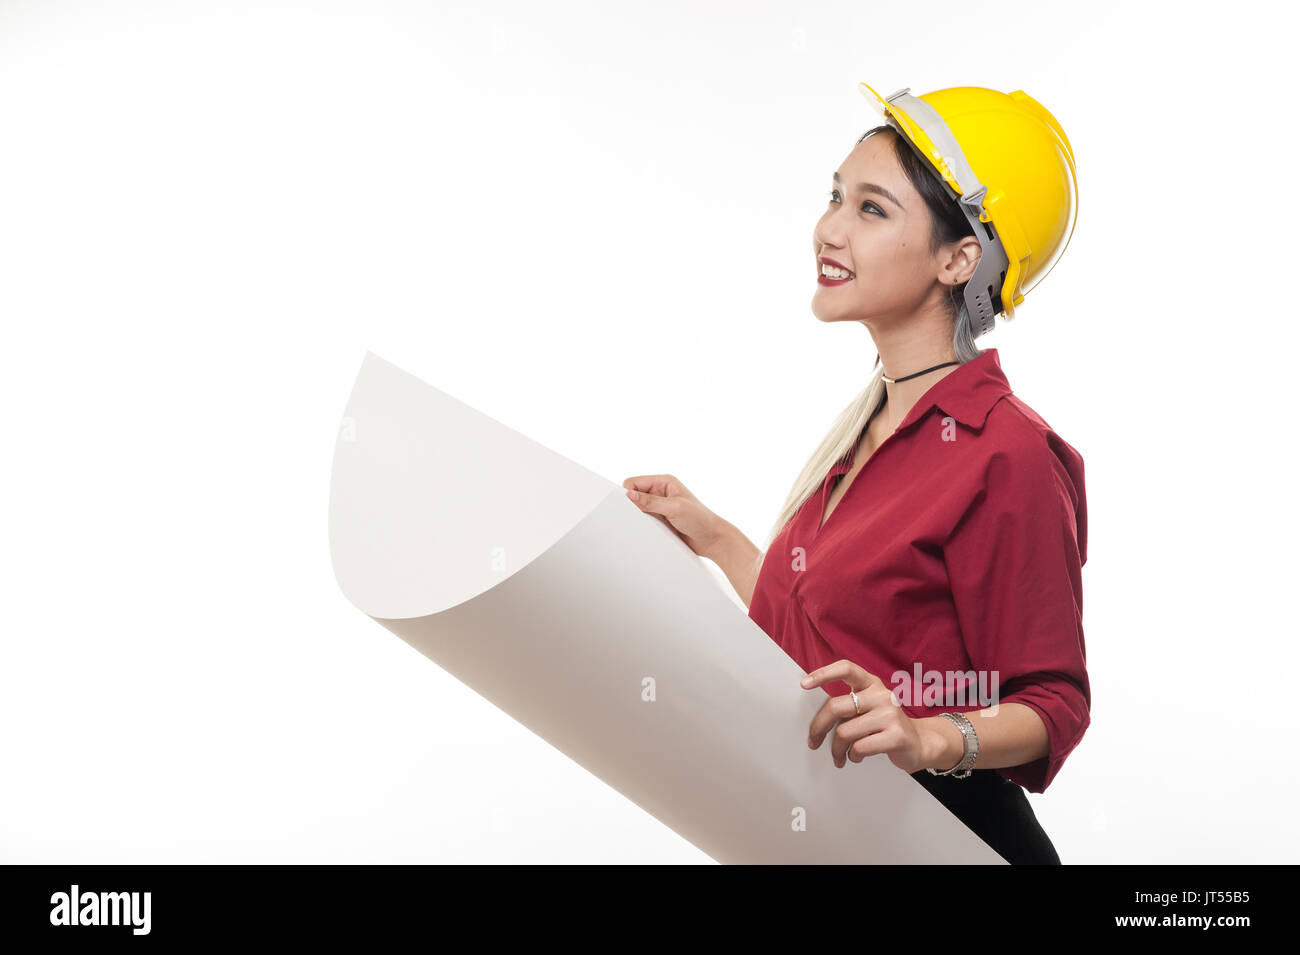 Young Asian woman architect with red shirt and yellow safety helmet smiling while reading blueprints. Industrial occupation people concept Stock Photo